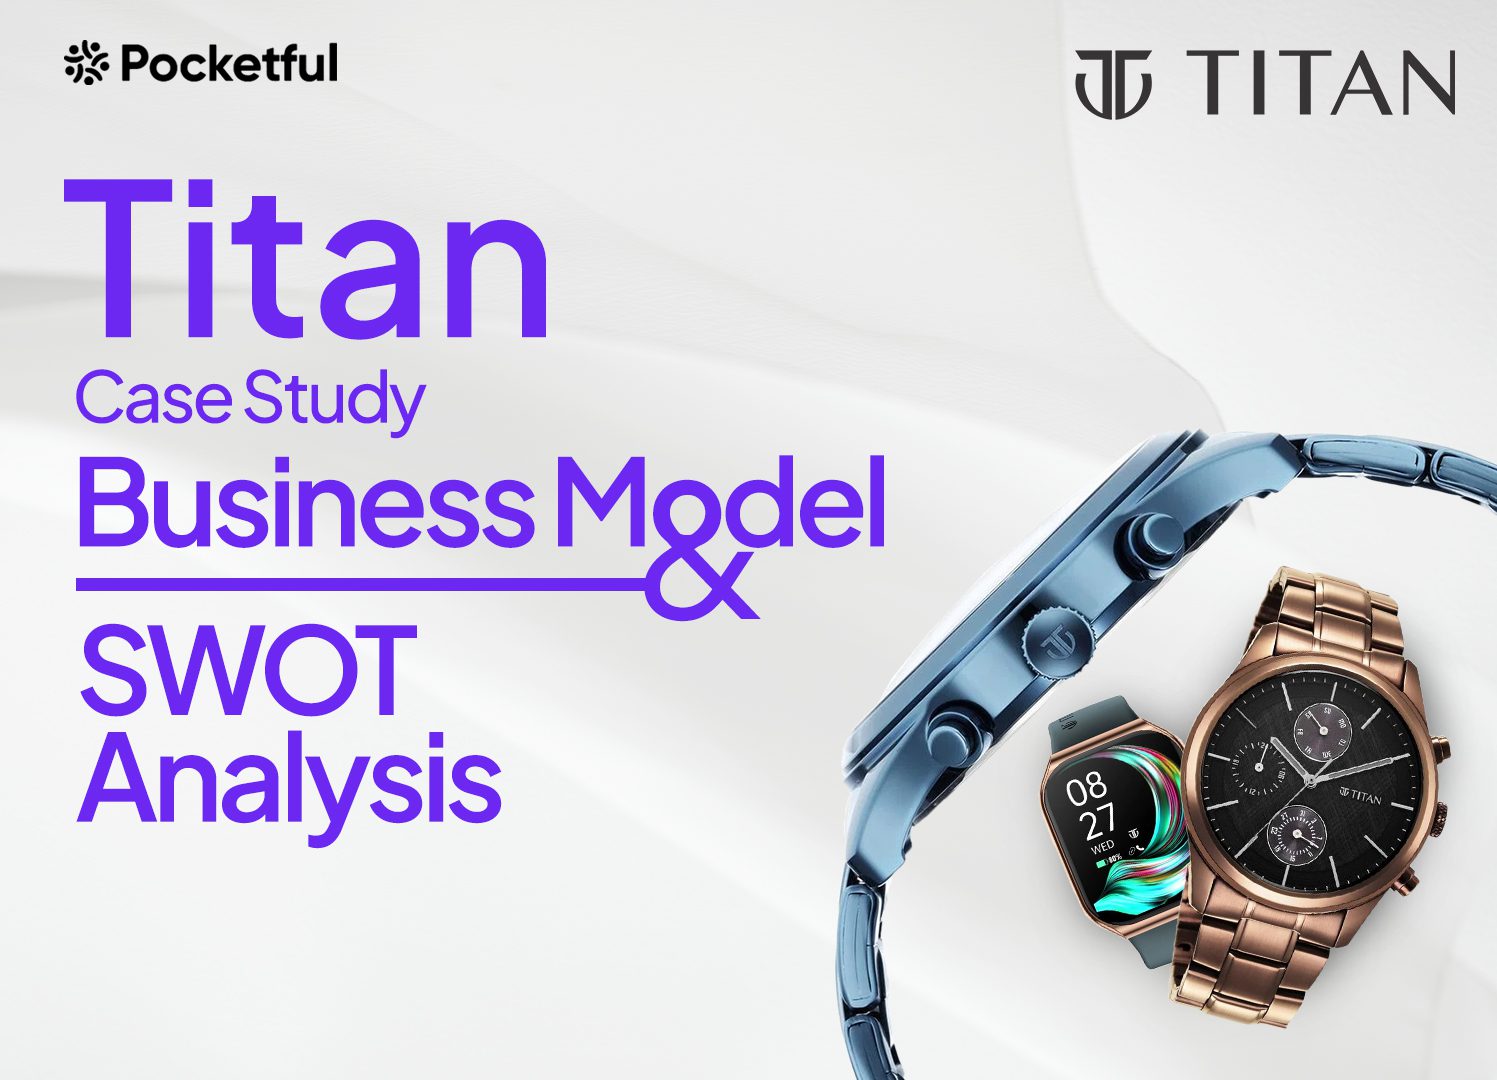 Titan Case Study: Business Model, Financials, and SWOT Analysis